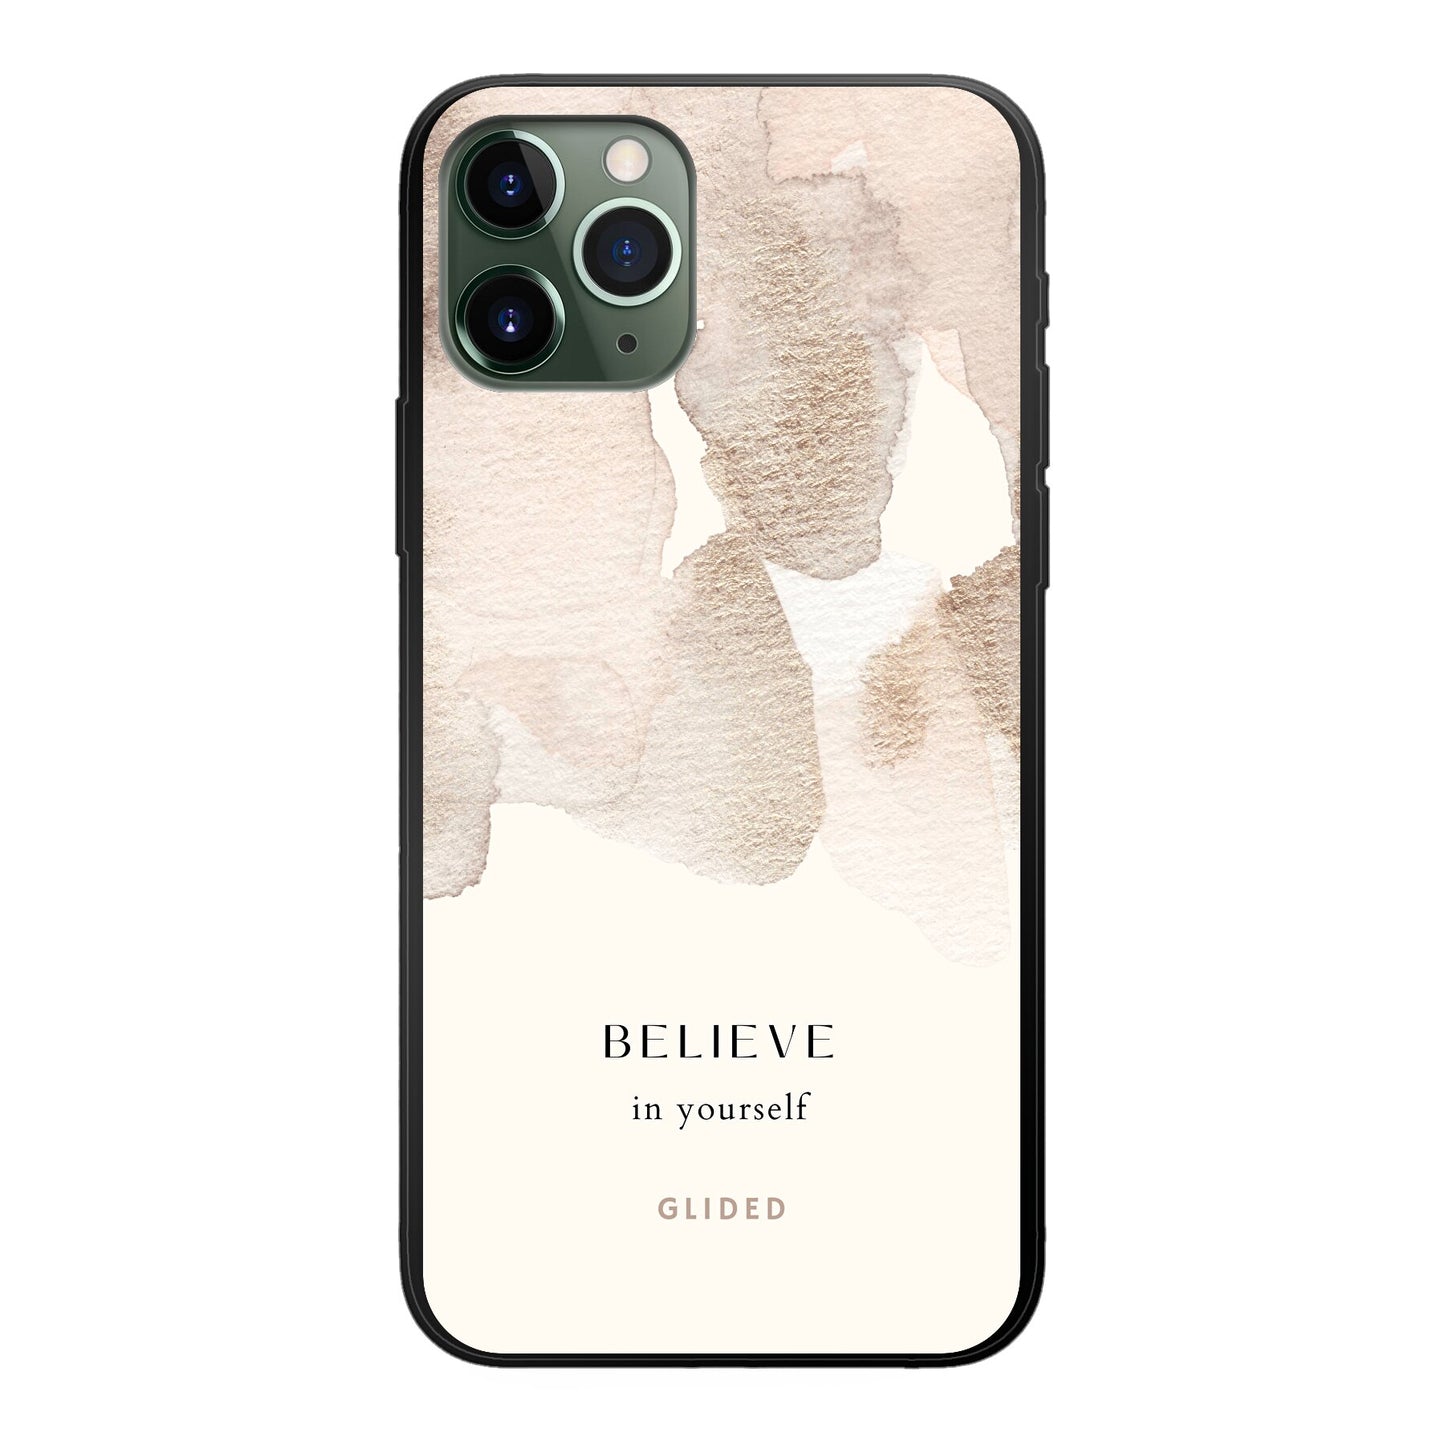 Believe in yourself - iPhone 11 Pro Handyhülle Soft case